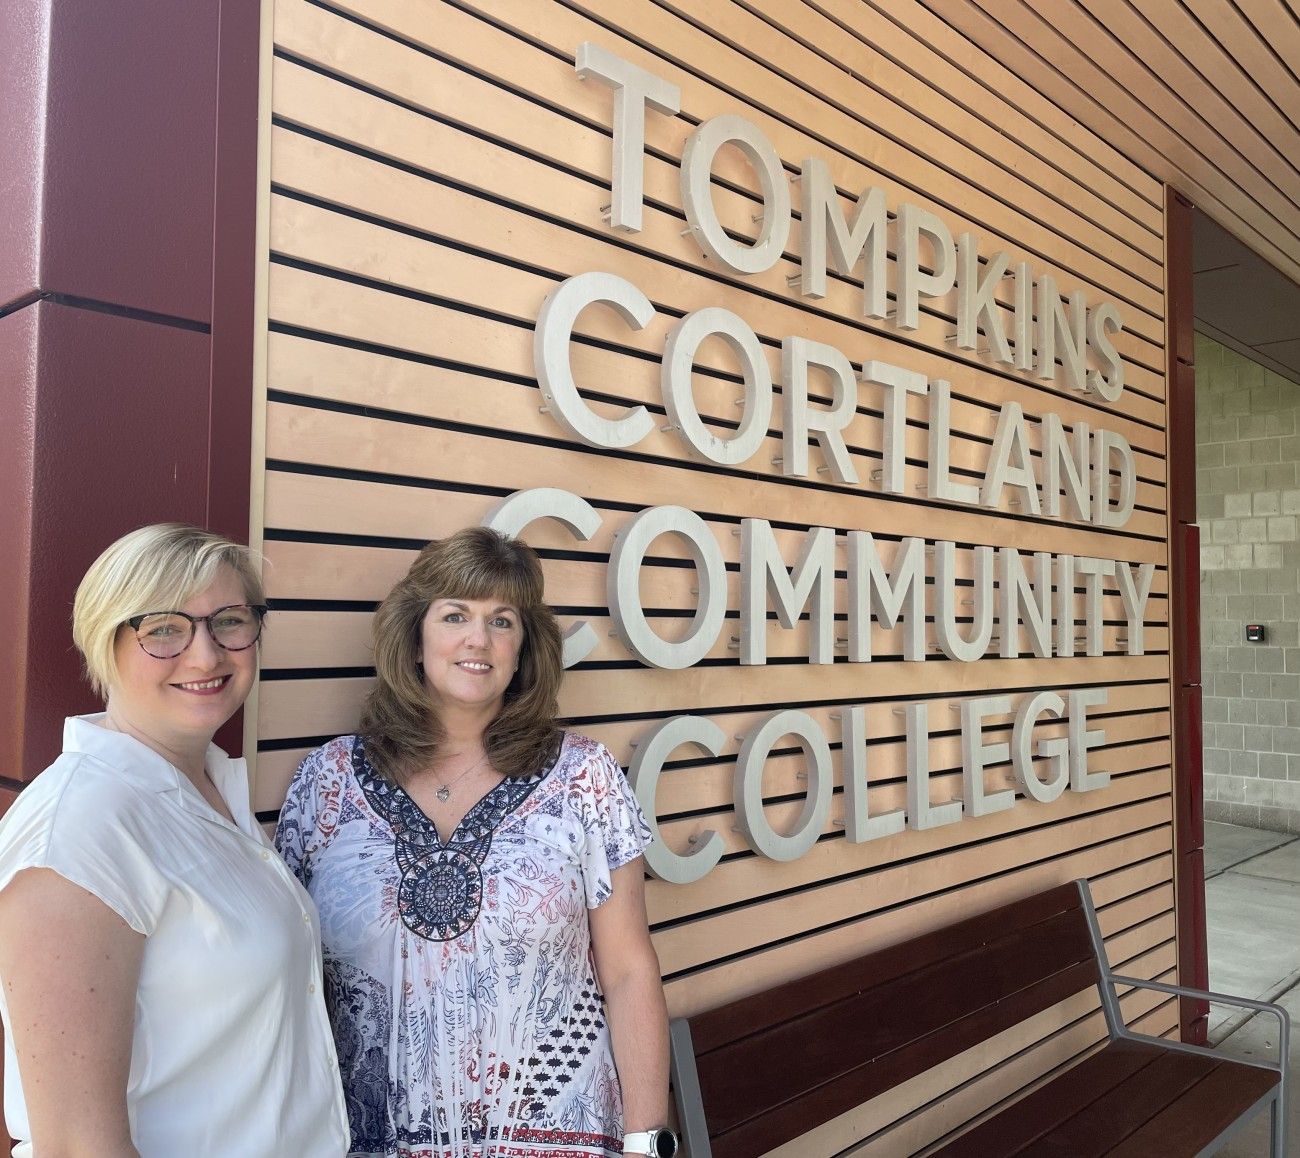 Two women standing in front of a sign that says "Tompkins Cortland Community College"